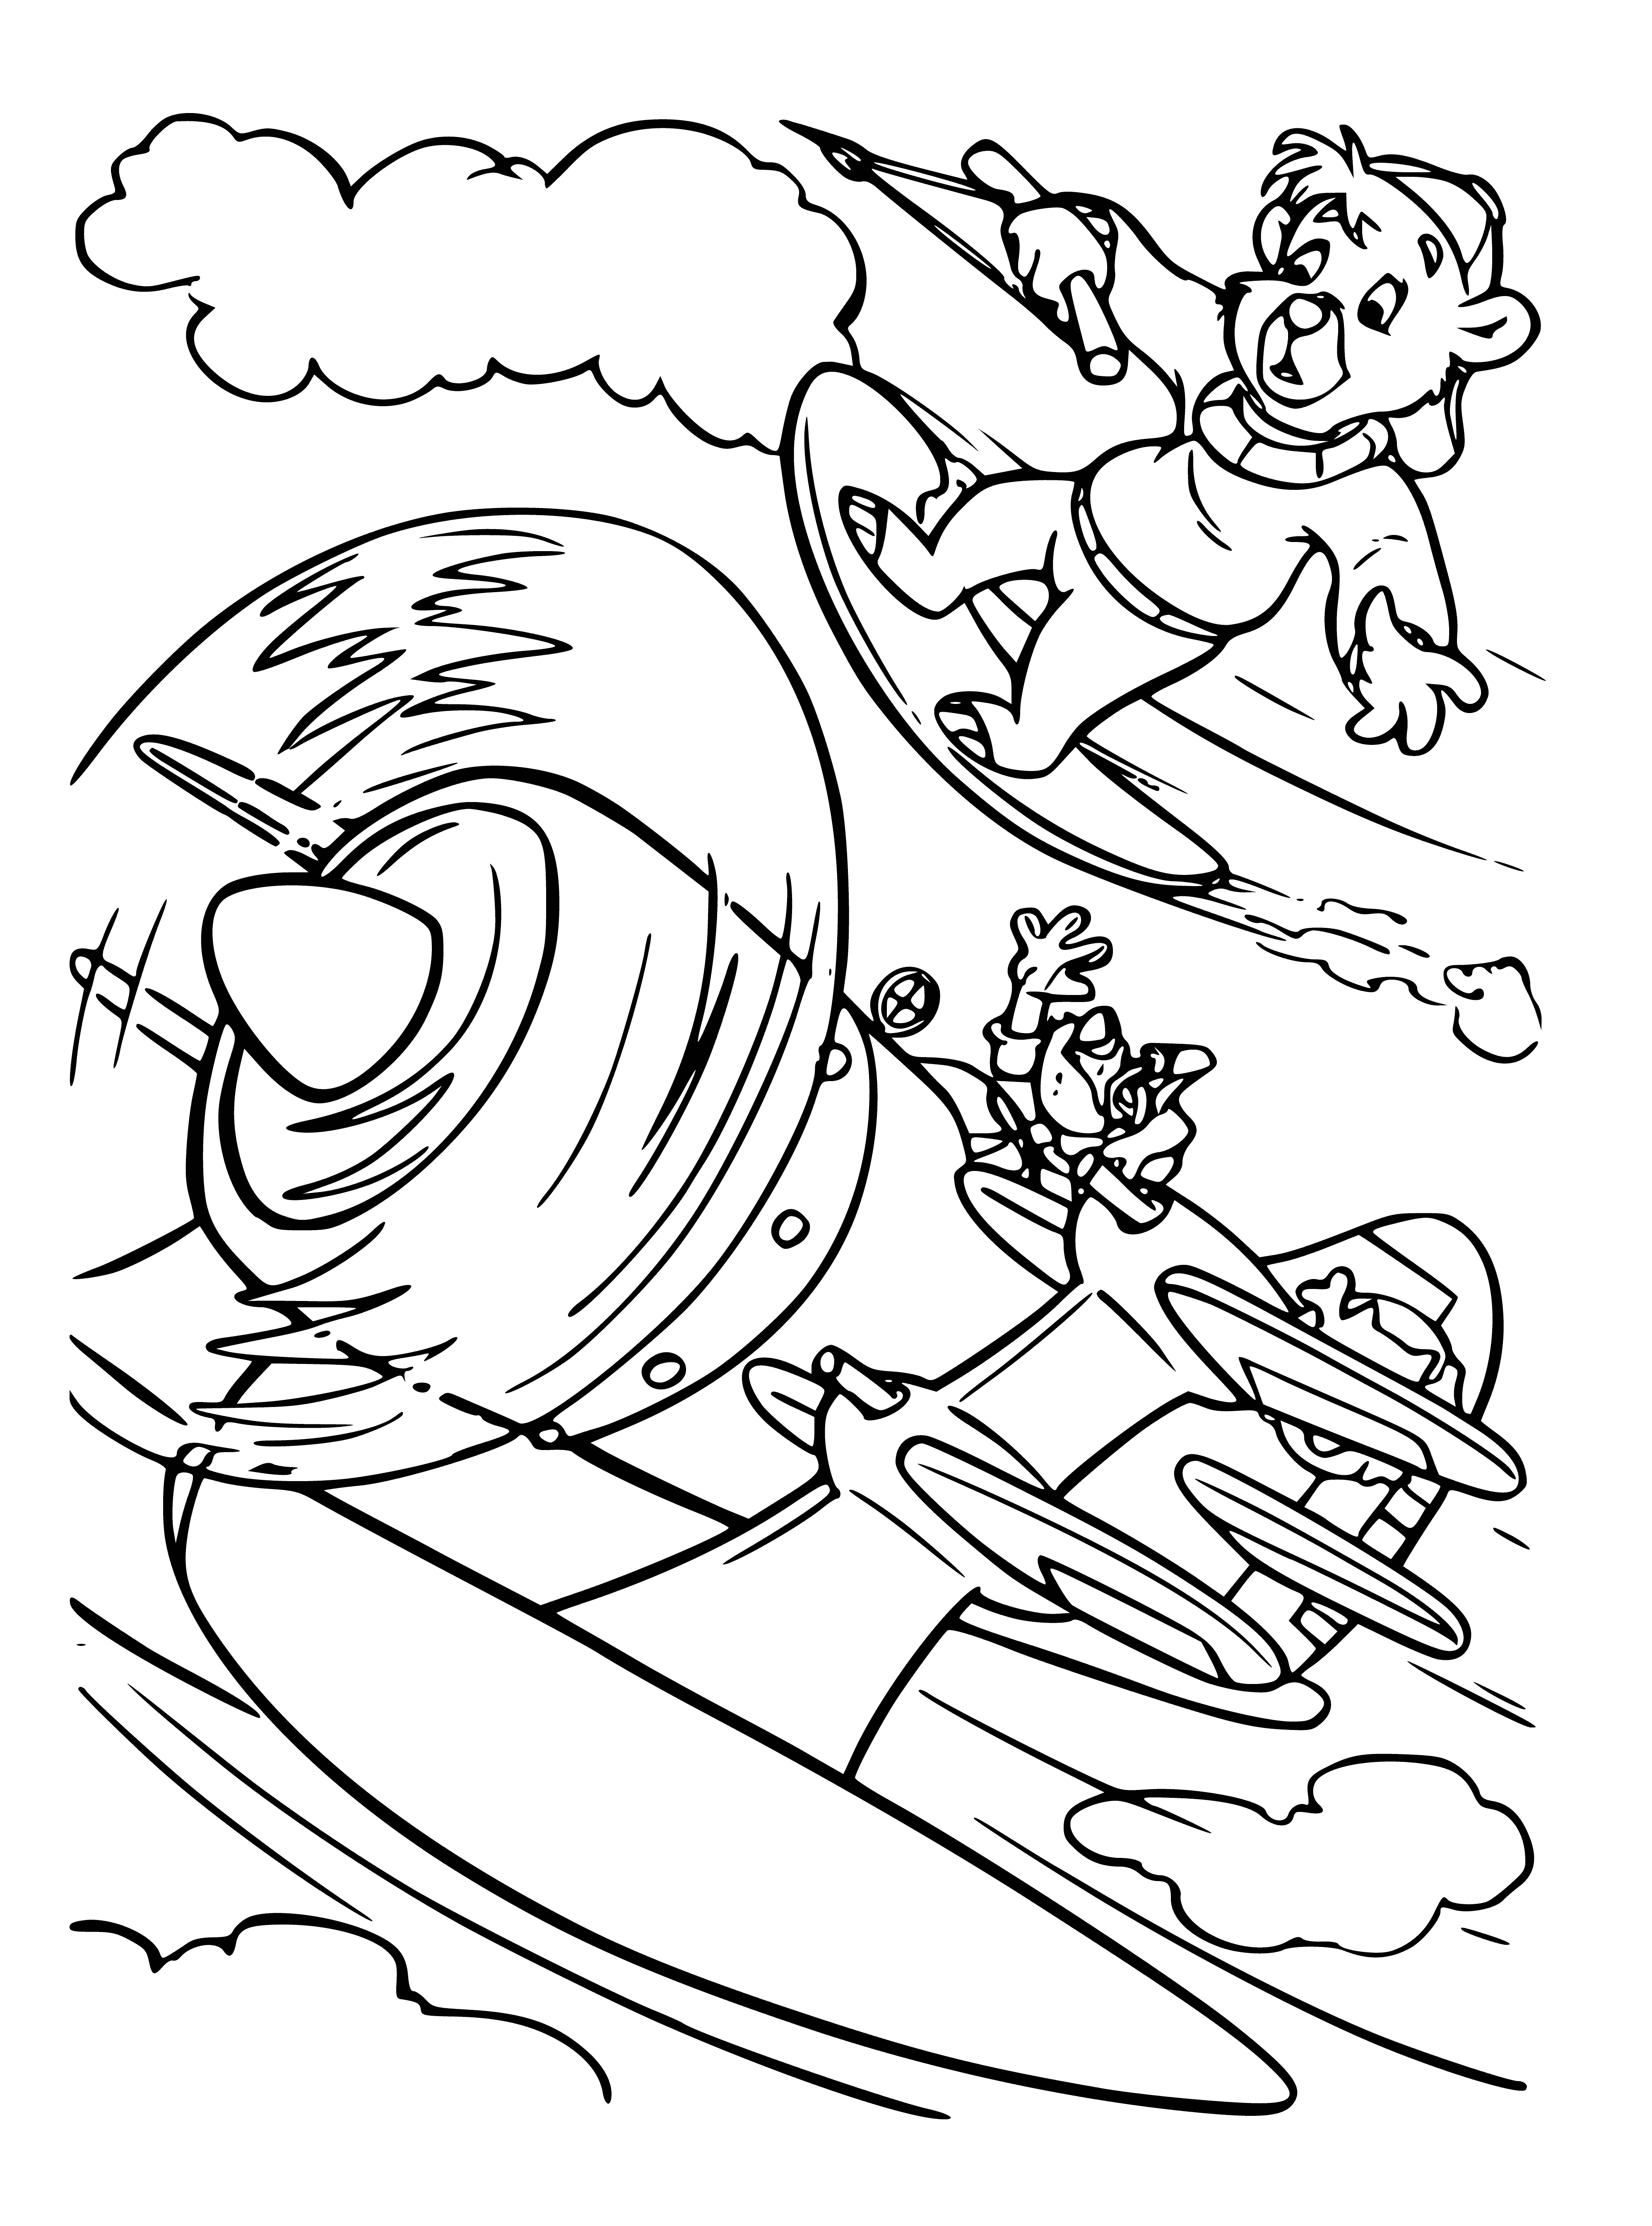 The whale is in danger coloring page